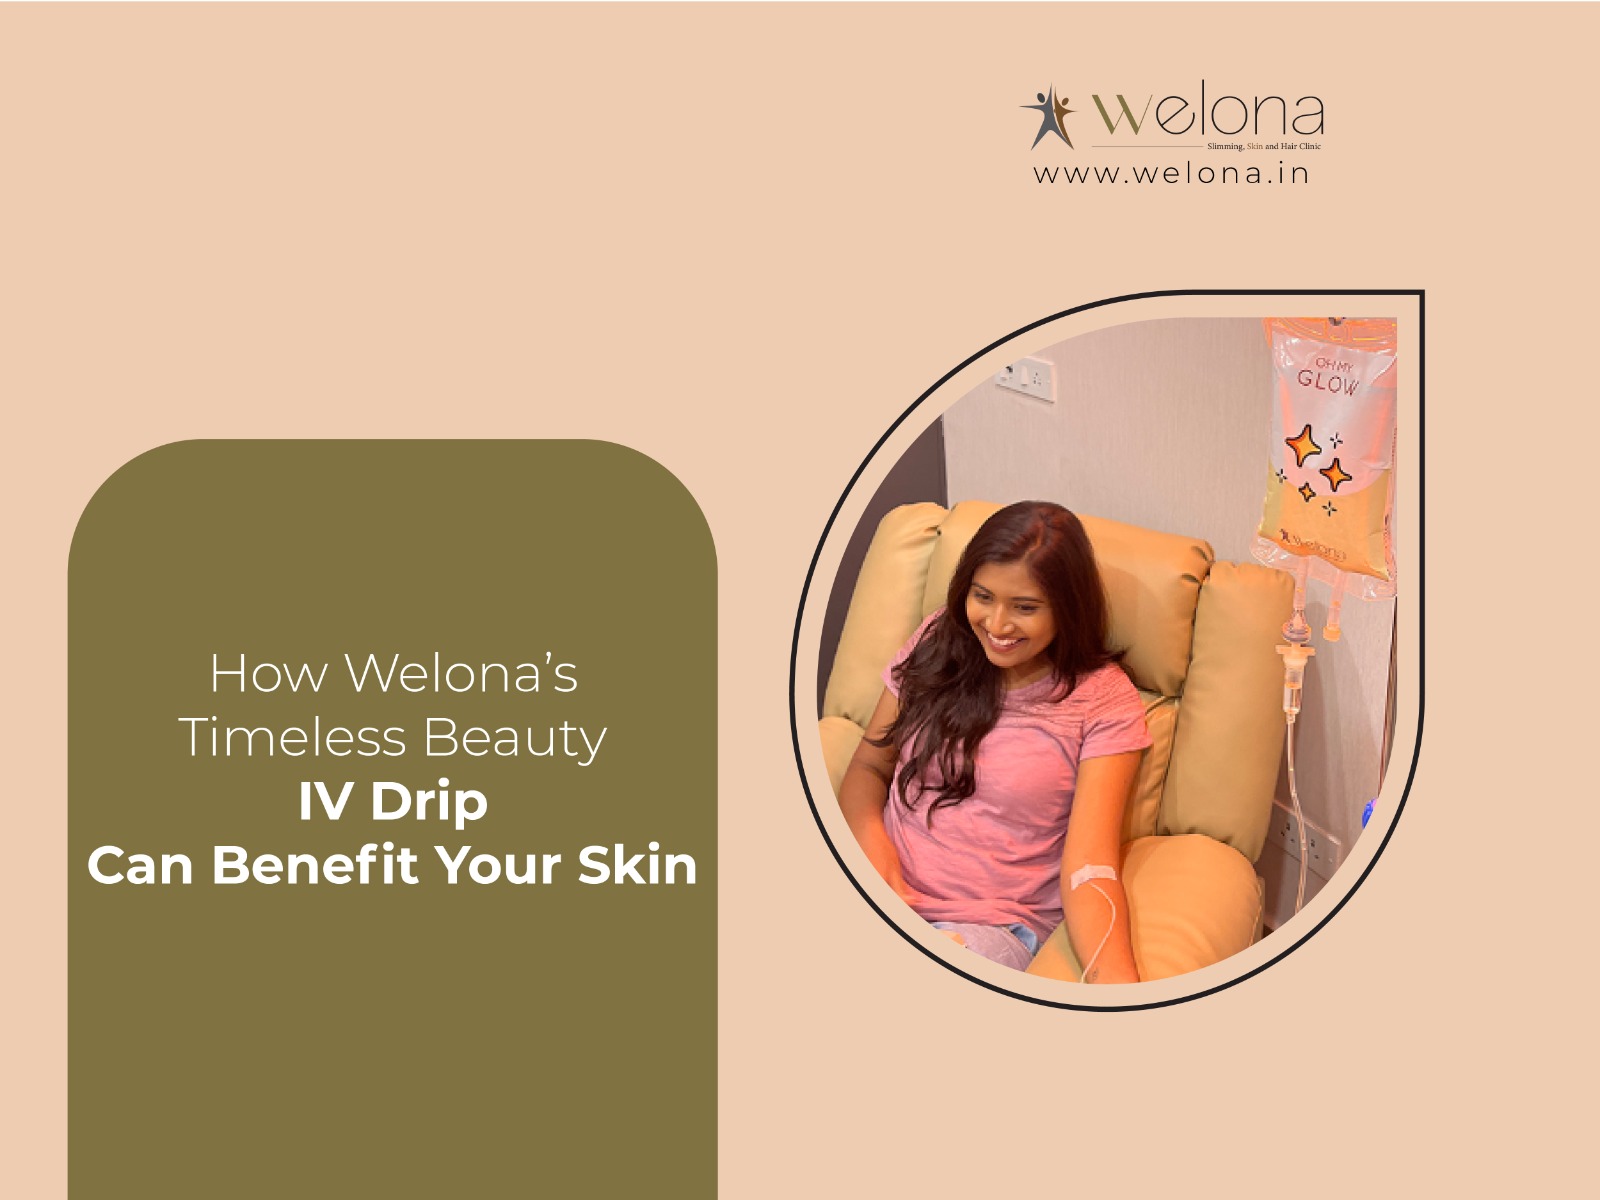 How Welona’s Timeless Beauty IV Drip Can Benefit Your Skin